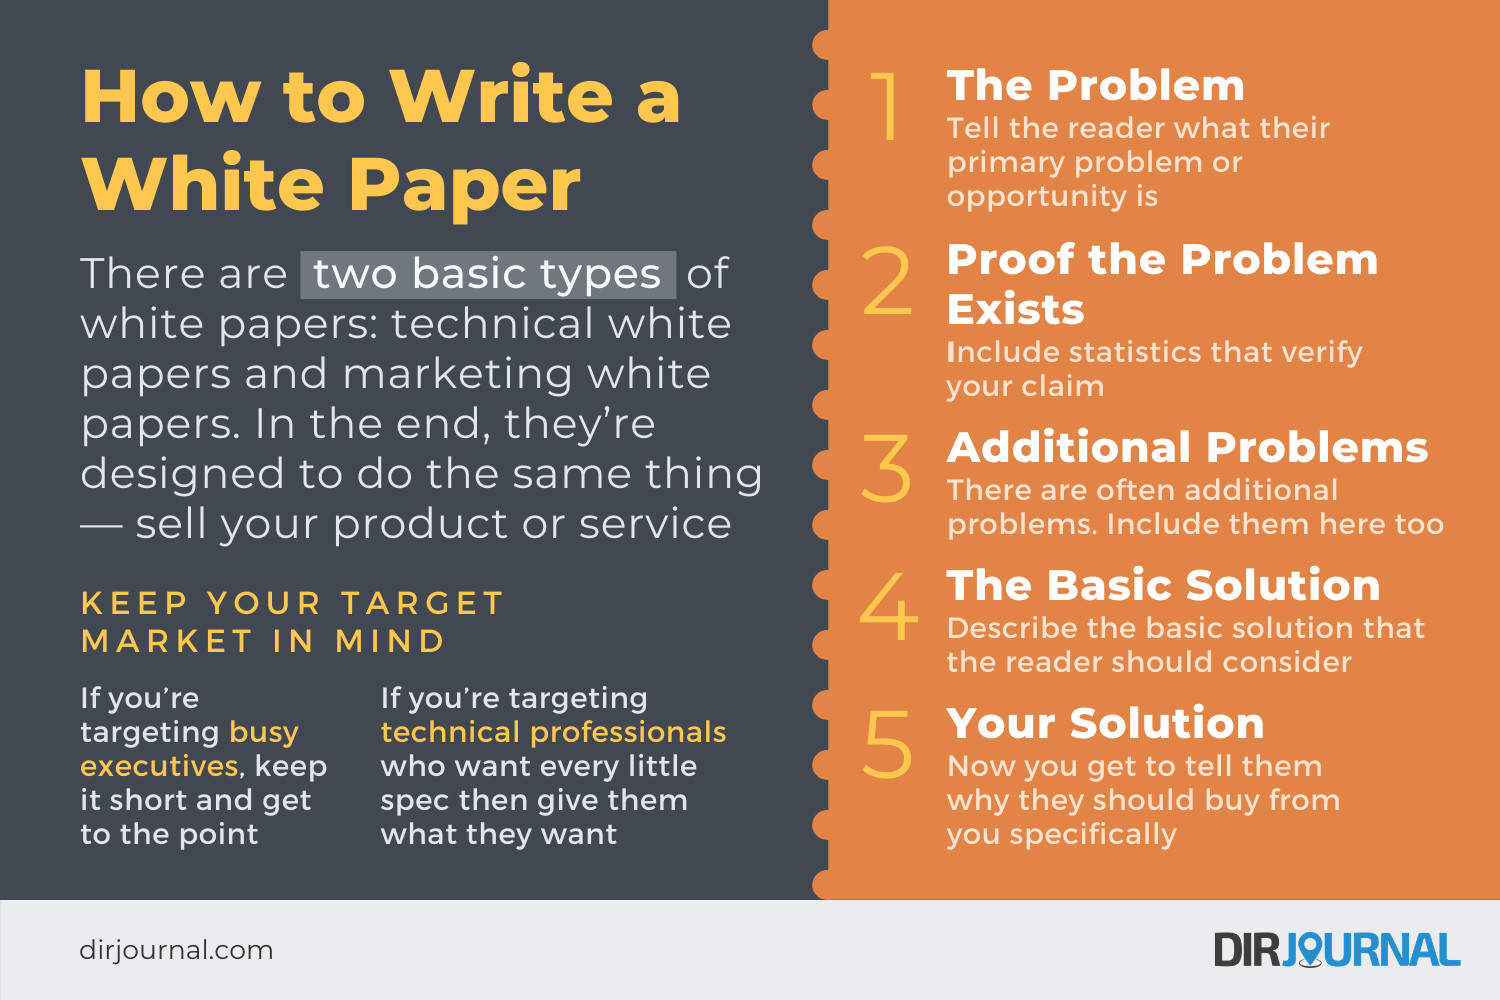 How to Write a White Paper (2023) - DirJournal Blogs